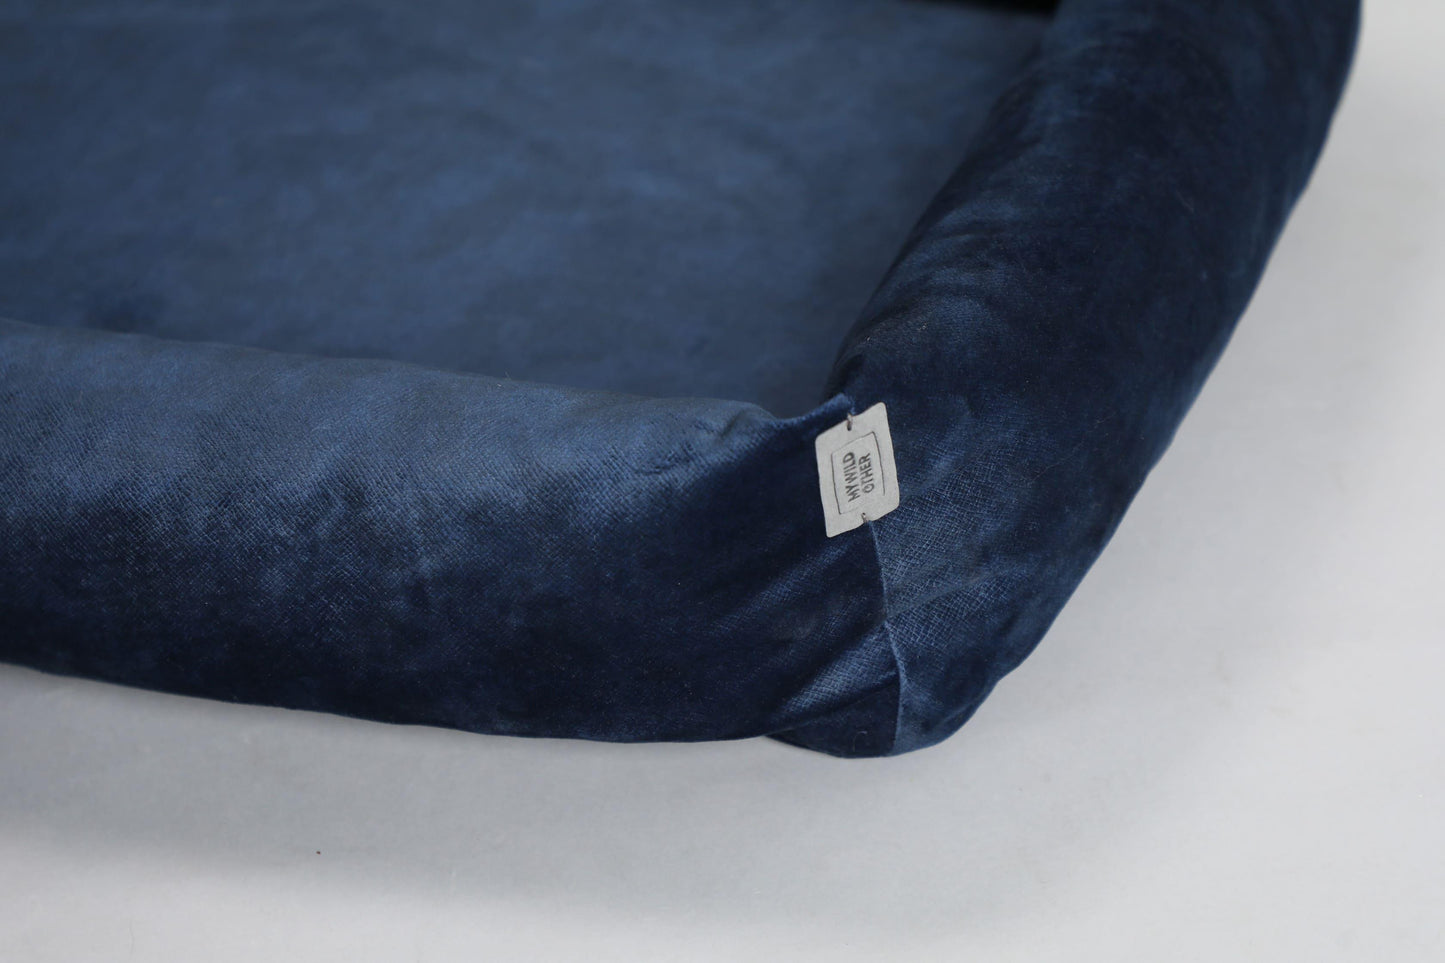 2-sided classic dog bed. ROYAL BLUE - handmade in Lithuania by My Wild Other